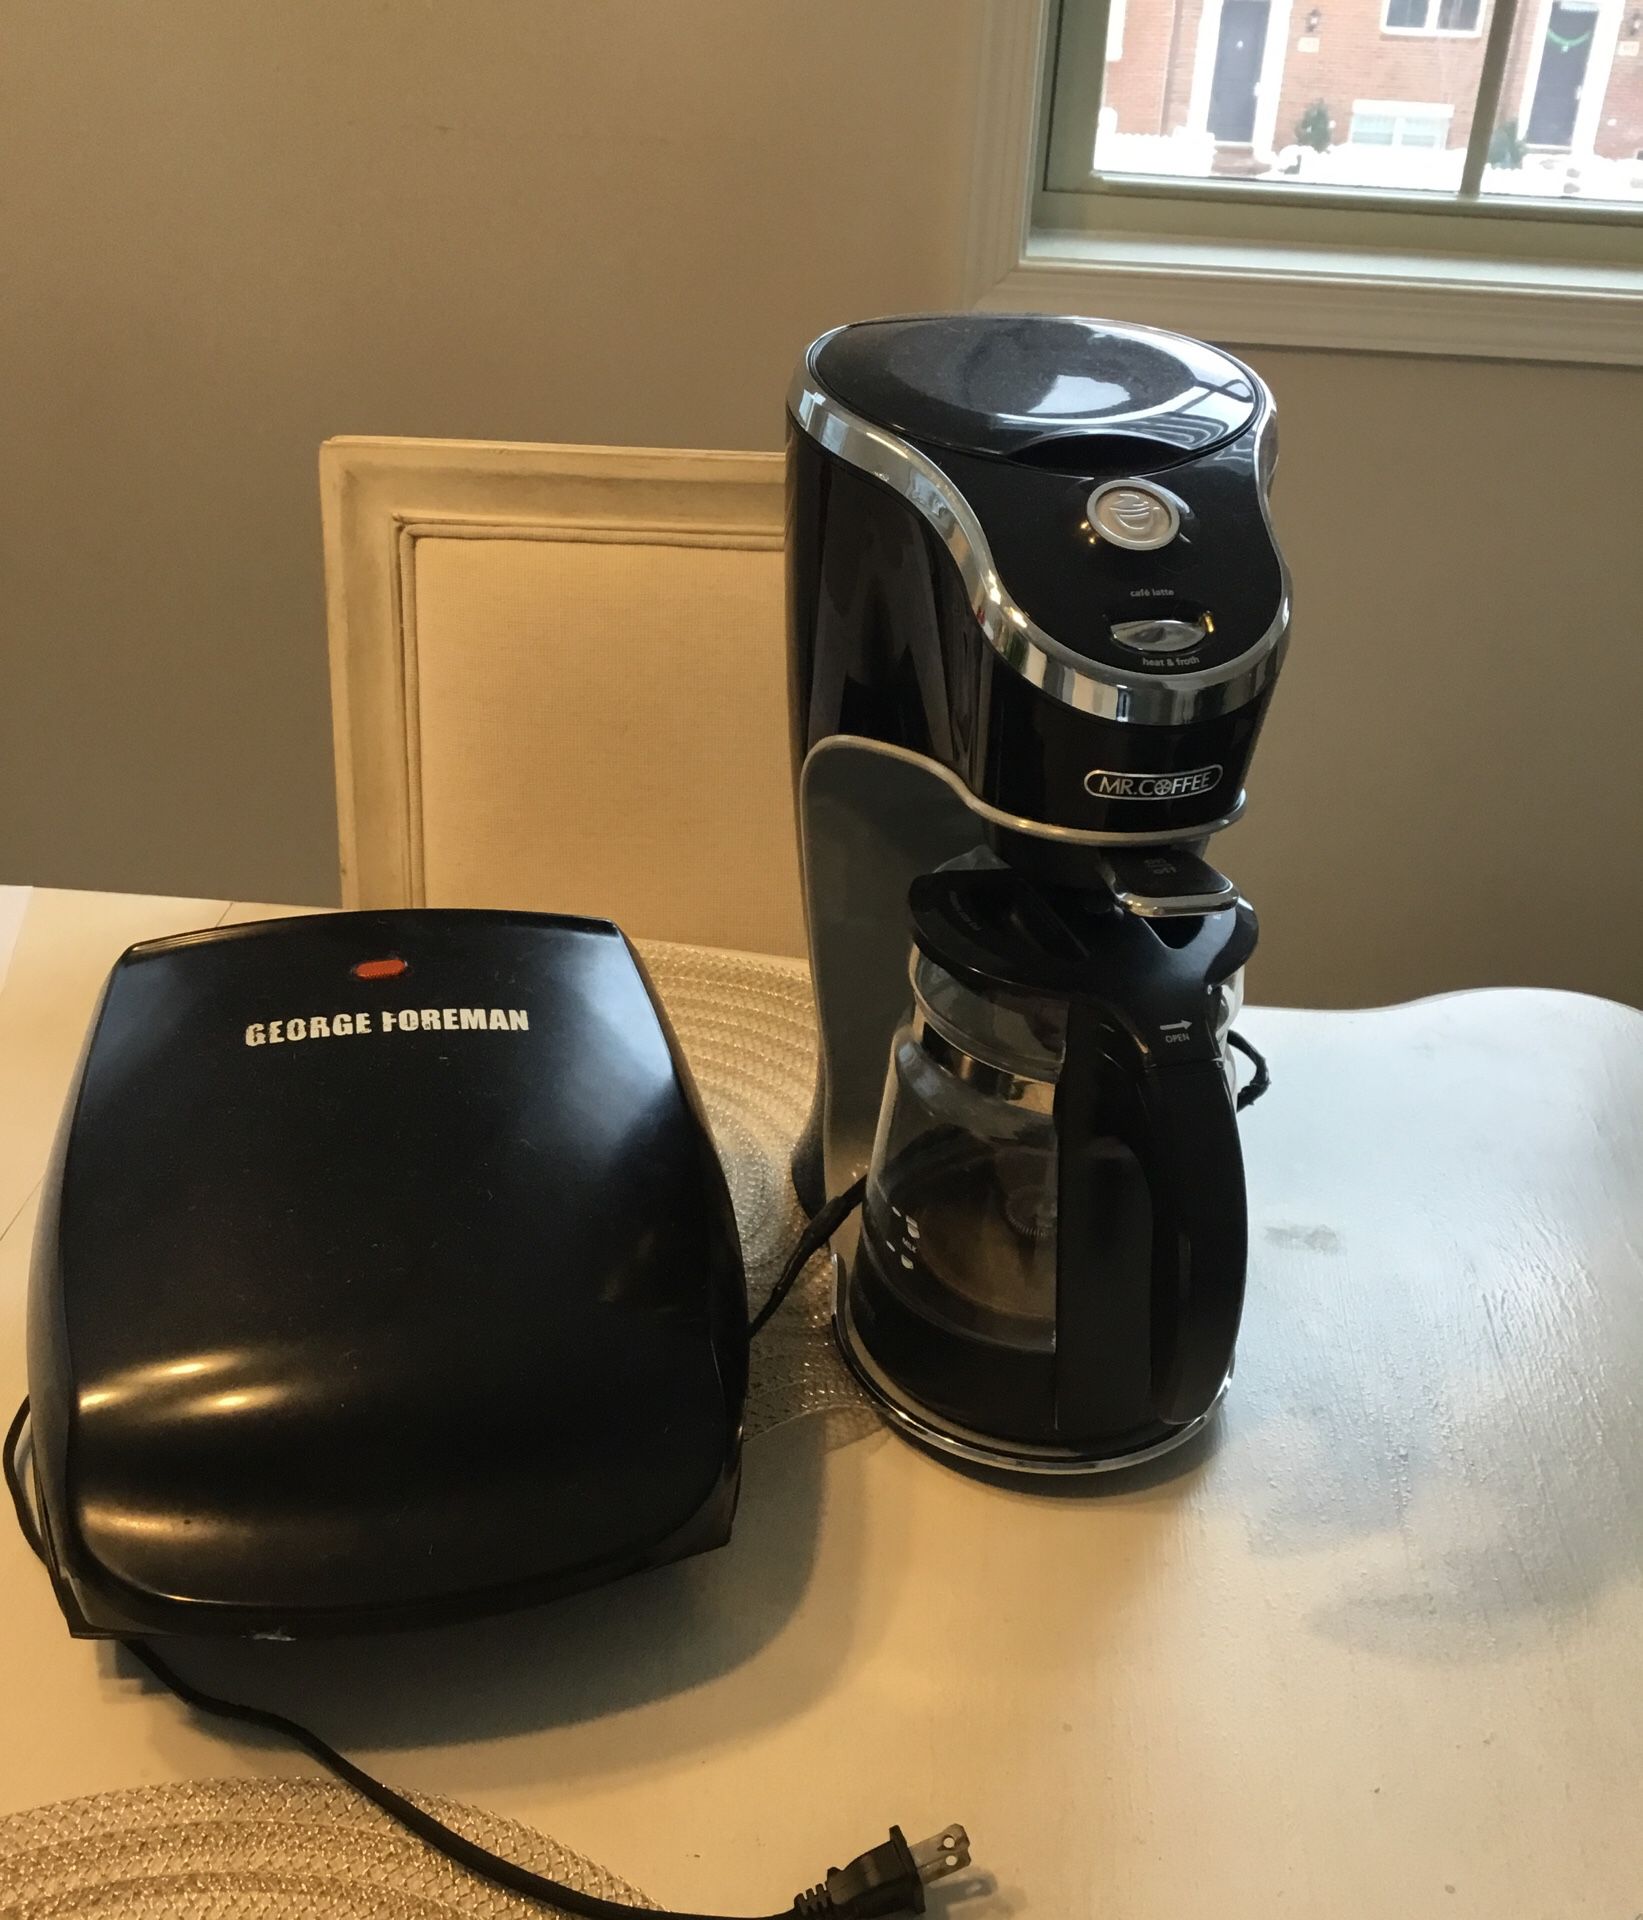 Coffee latte maker and grill in great working condition